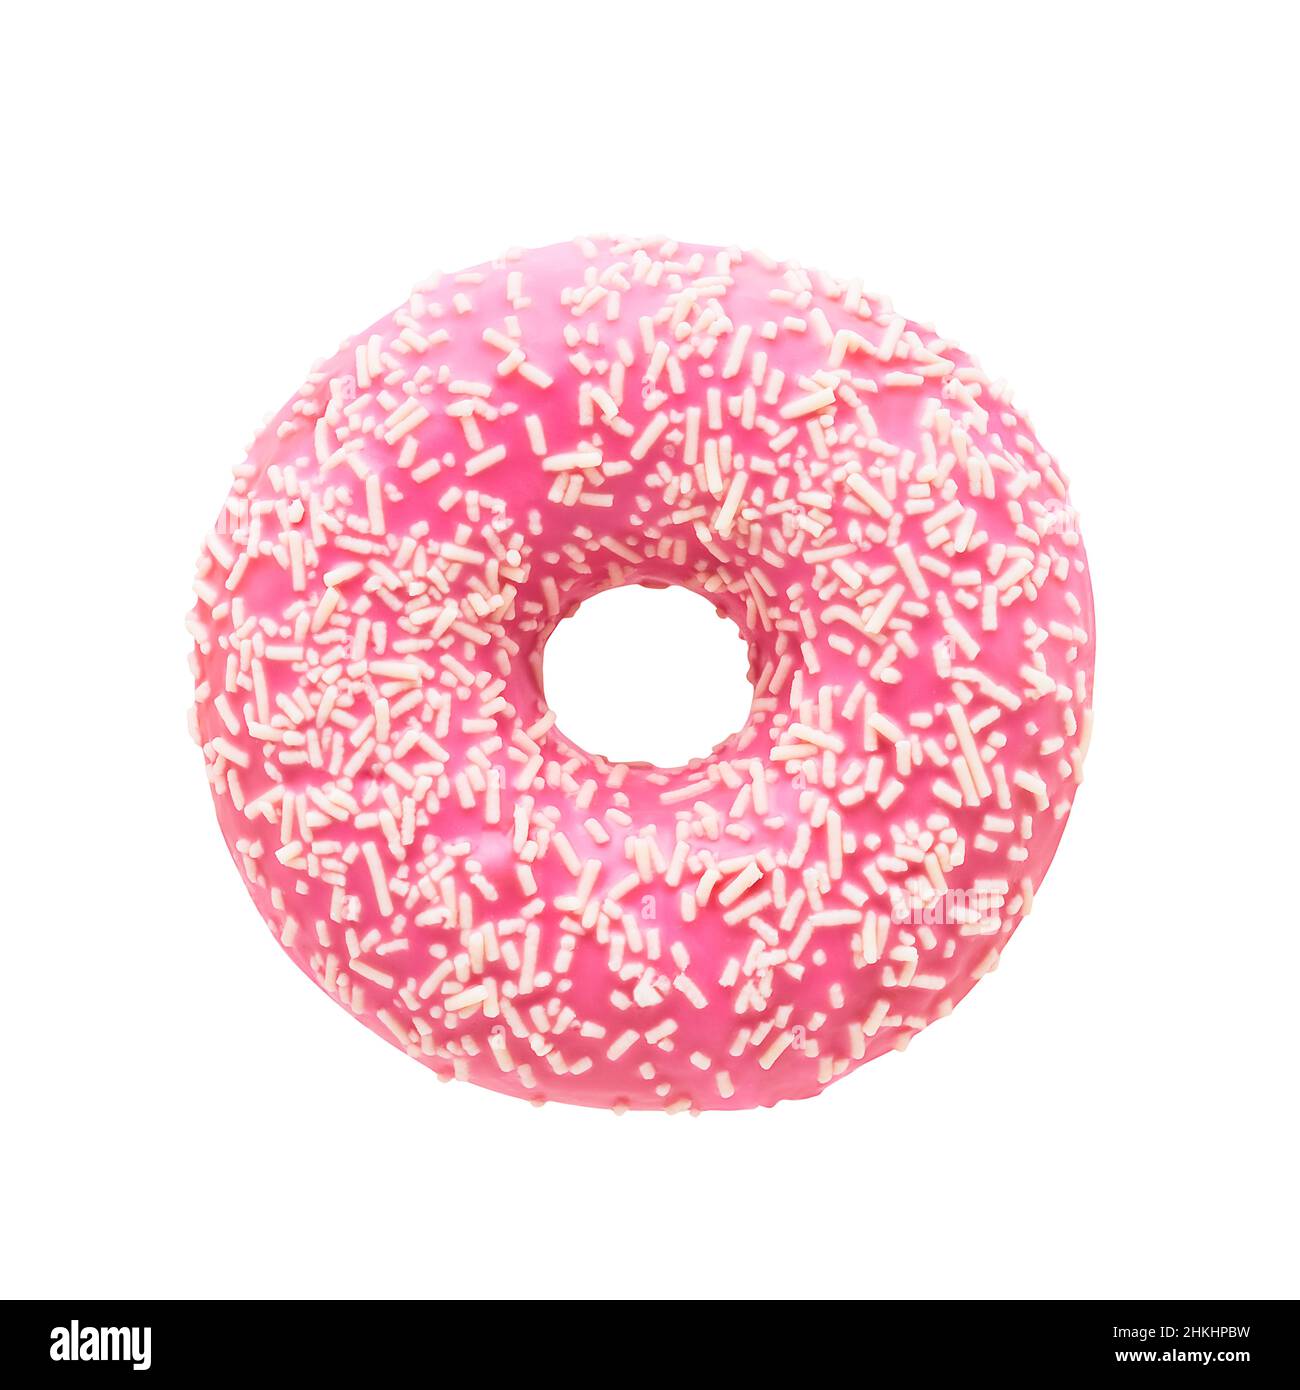 Donut in pink glaze with white sprinkles isolated over white background with clipping path. Stock Photo